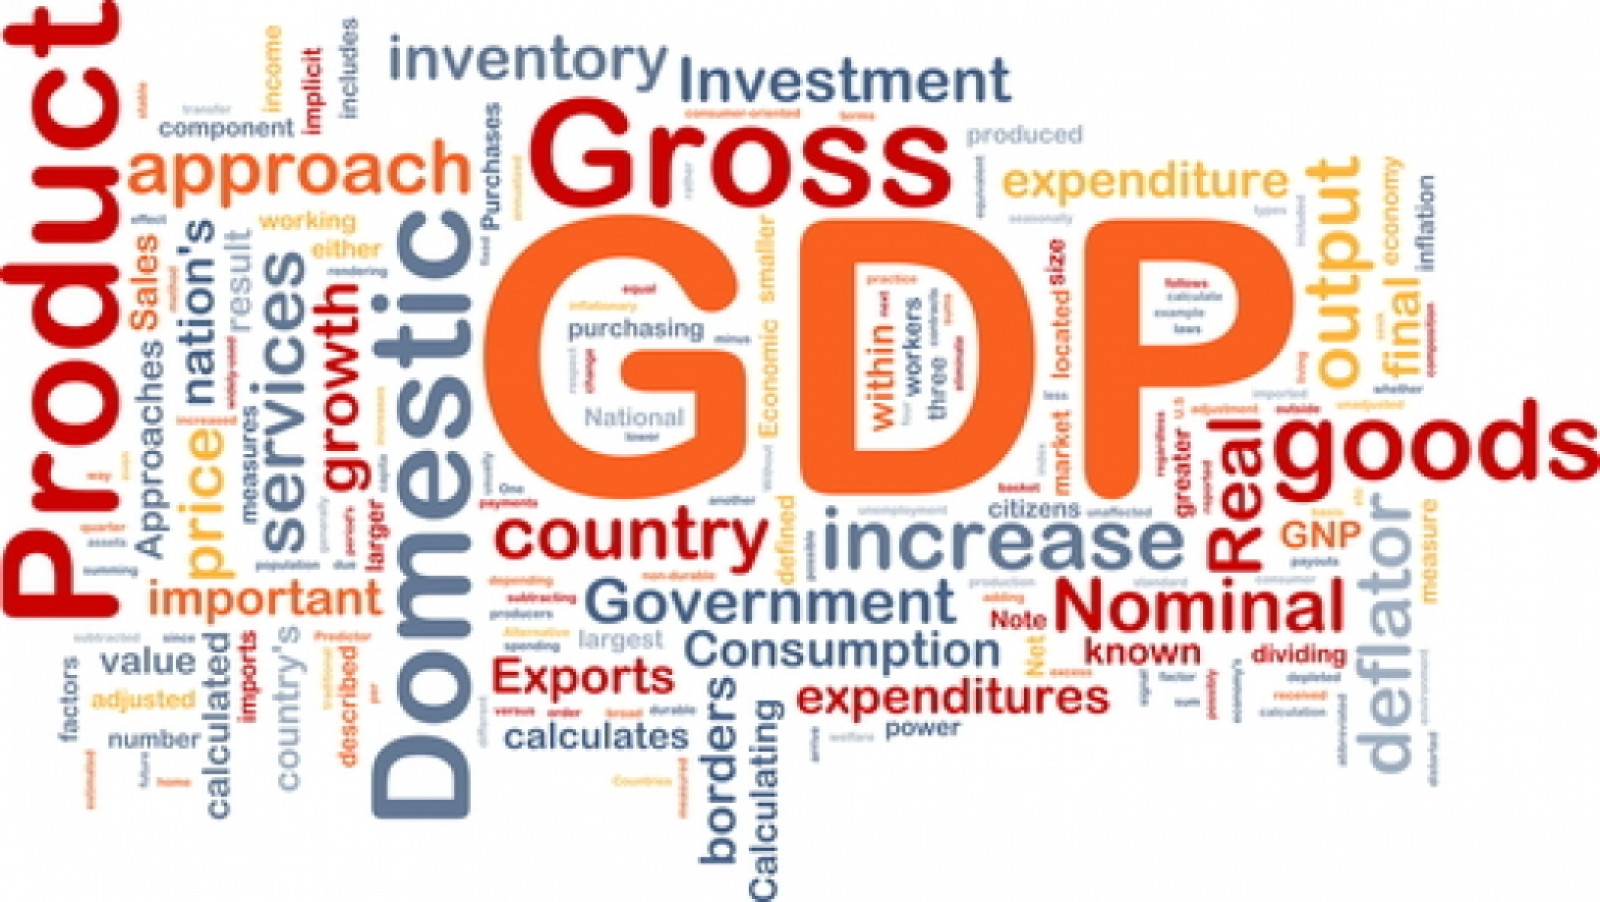 Manufacturing is GDP star performer - By BBC's Robert Peston